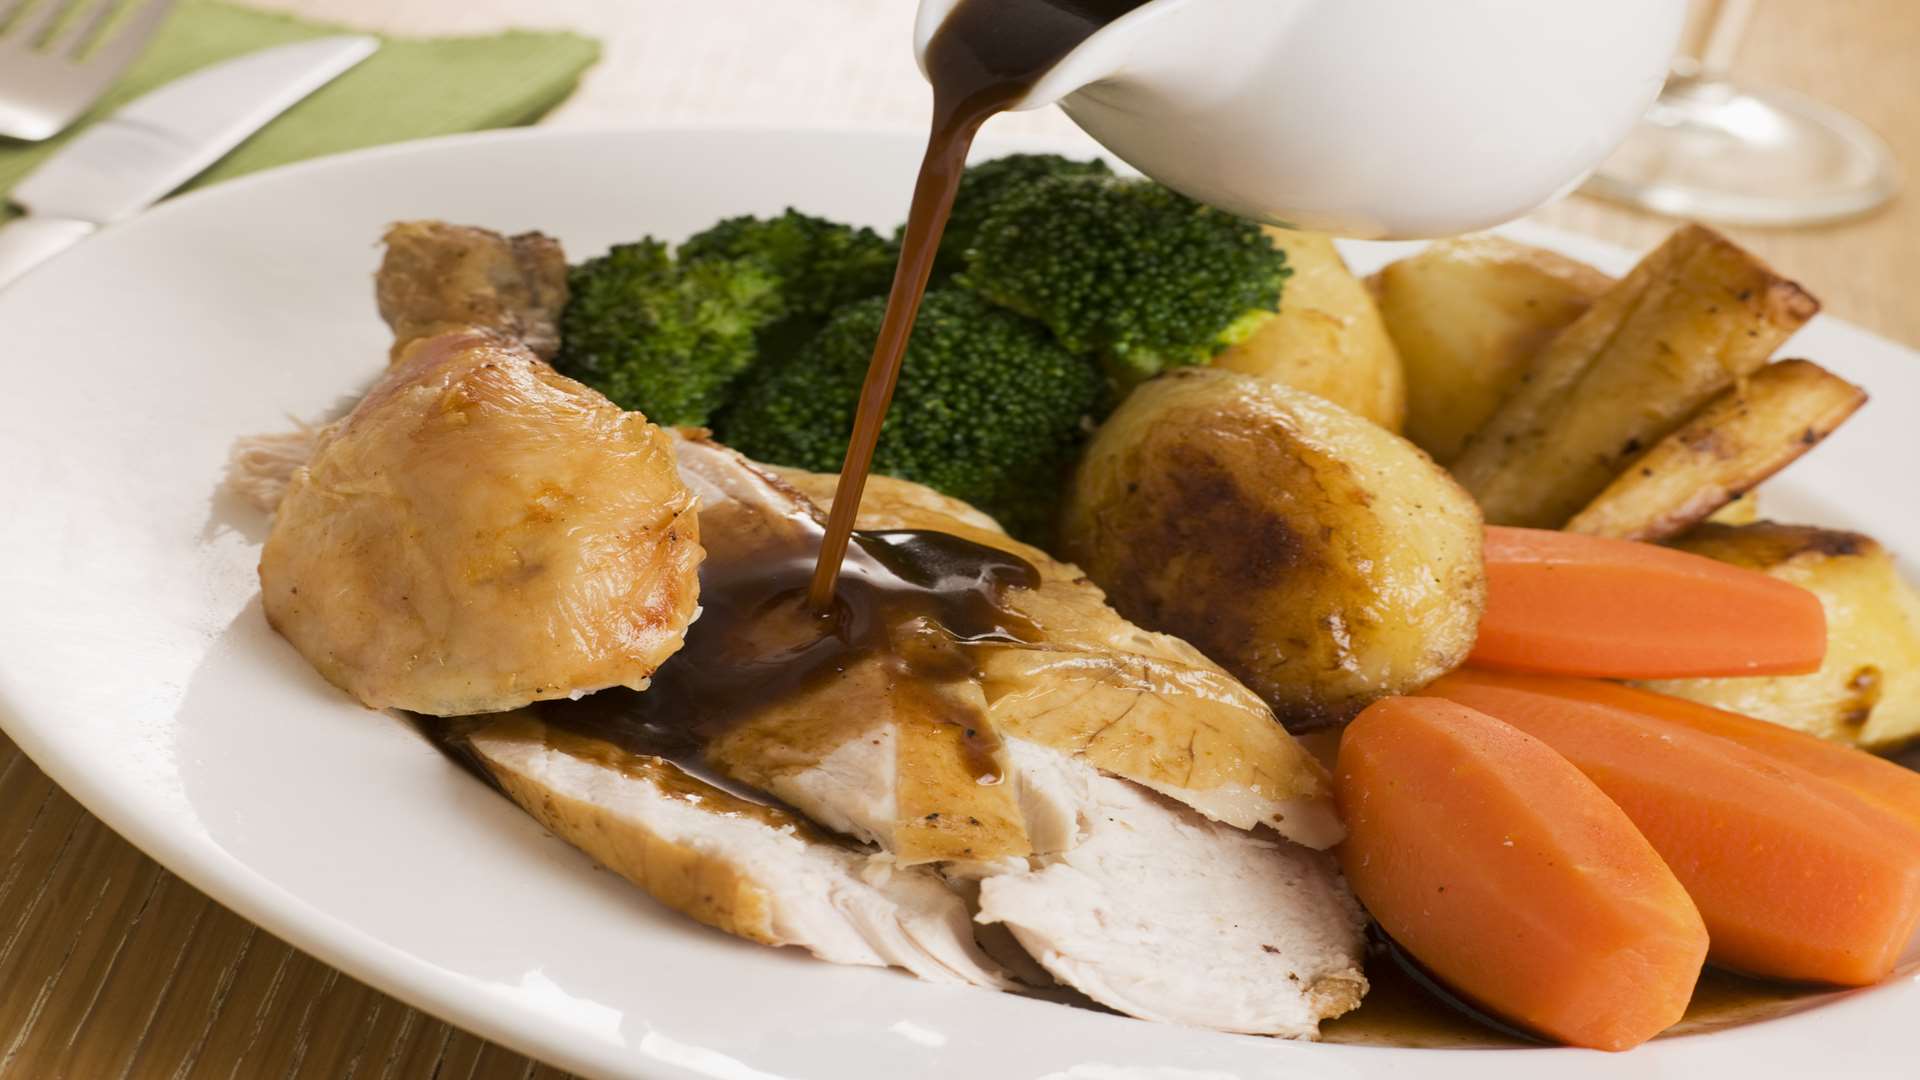 The competition aims to find the best pub roast. Stock image.